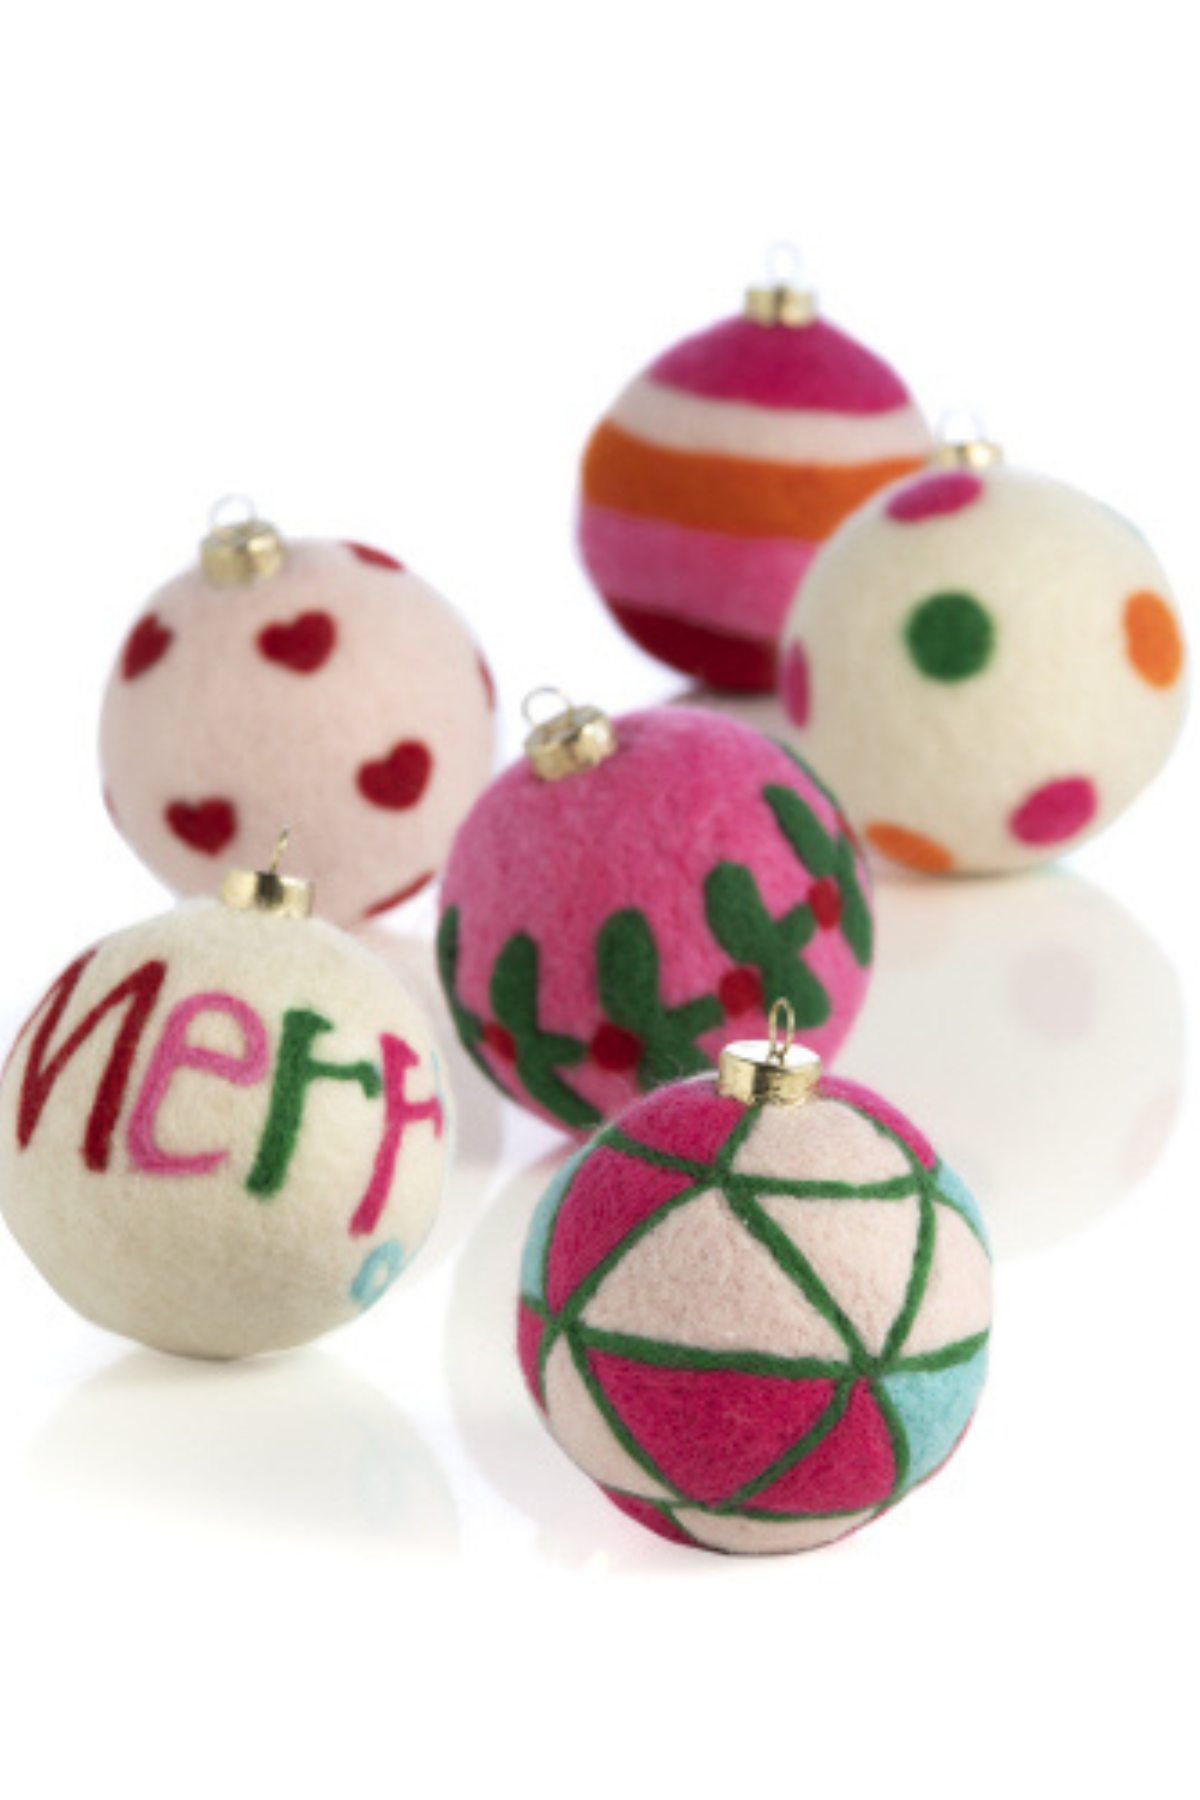 Merry Assorted Fabric Ornaments